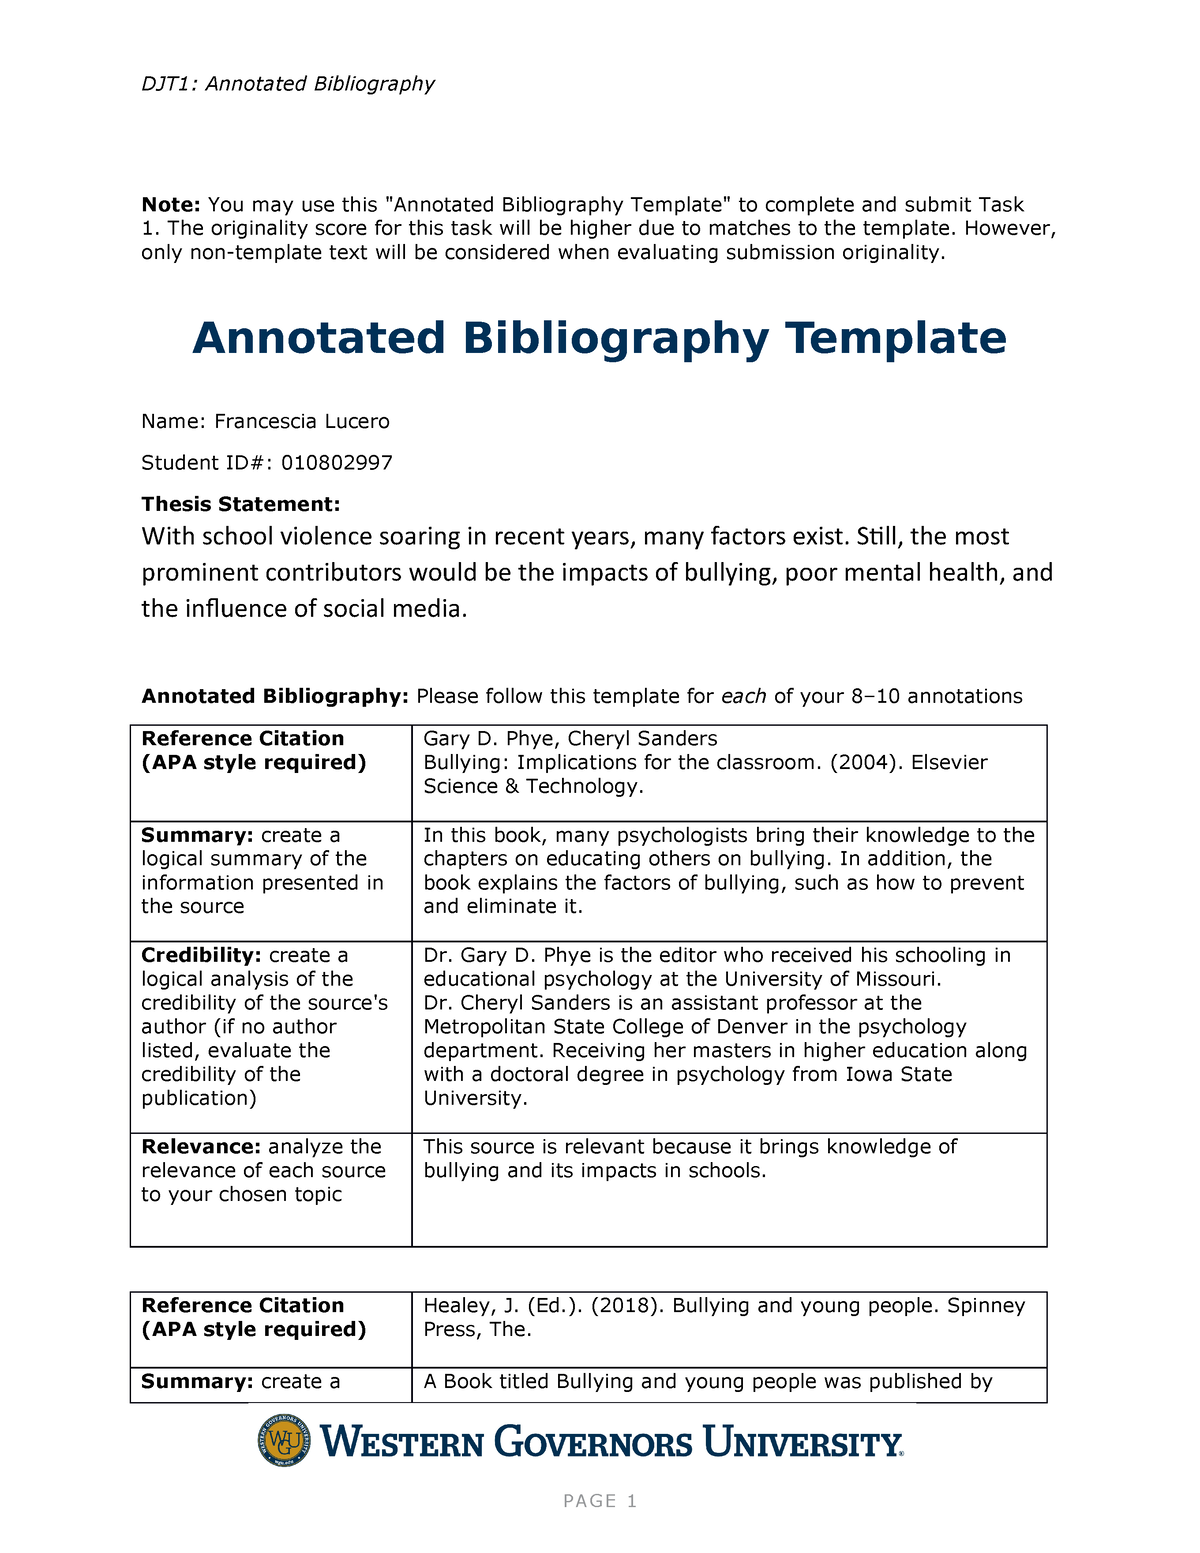 annotated bibliography qut